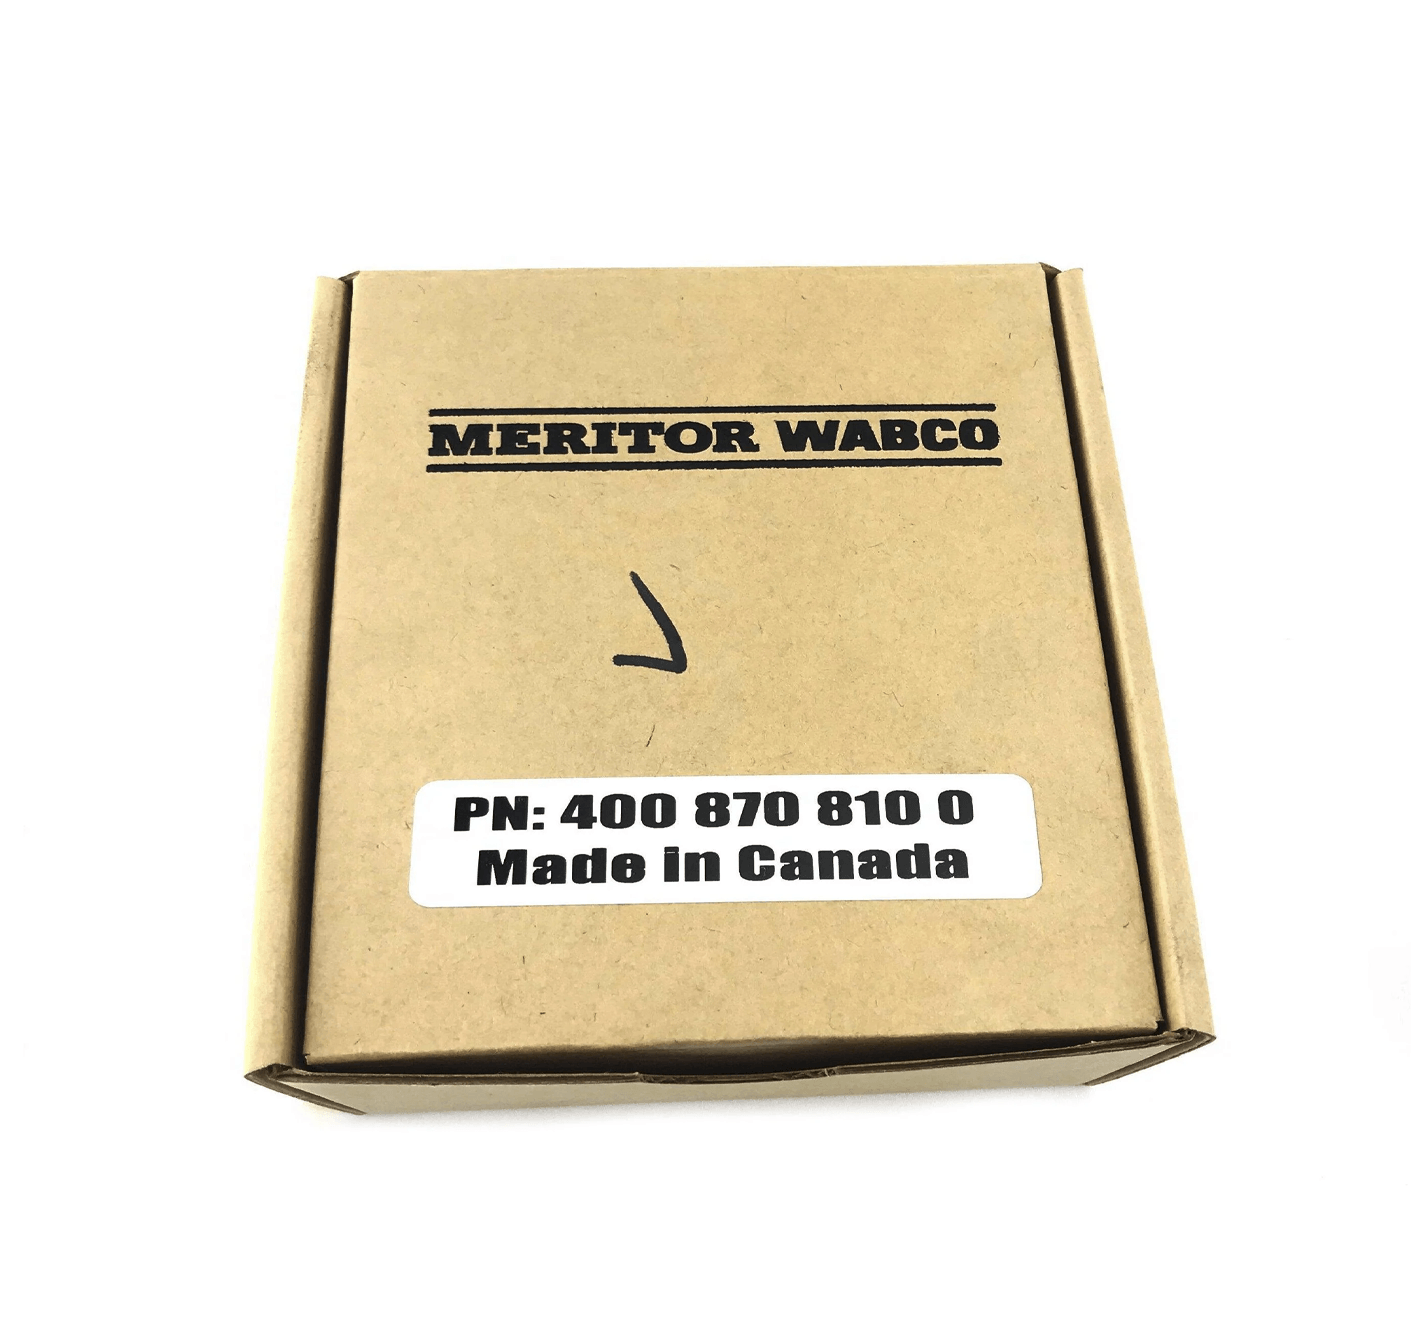 S4008708100 Wabco Meritor® Drive Display On-Guard Collision System - ADVANCED TRUCK PARTS